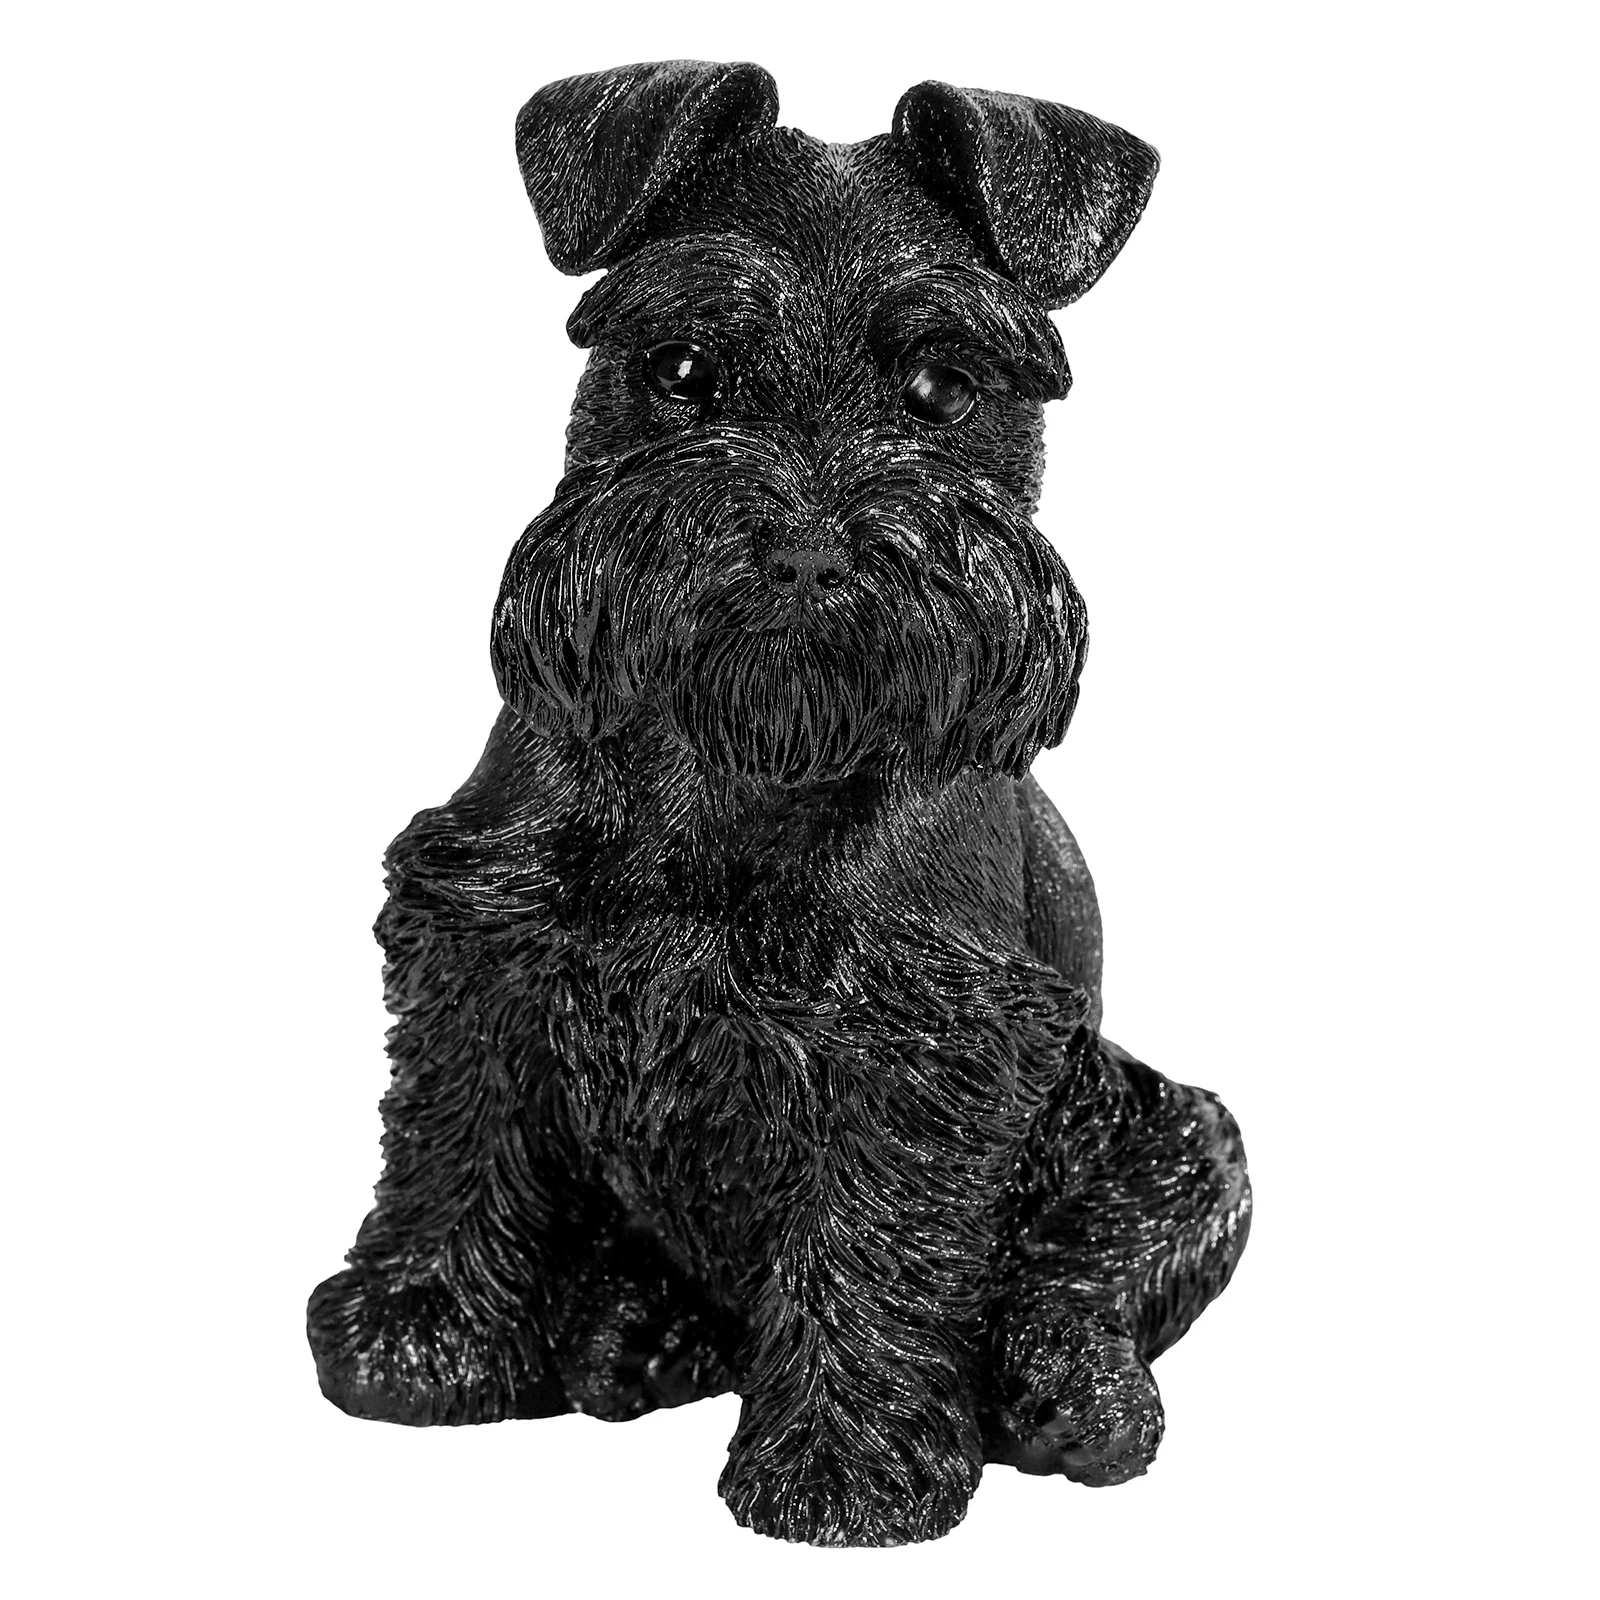 Lovely Mini Schnauzer Puppy Stone Statue Carved Black Obsidian Animal Figurine For Home Decor wireless air humidifier lovely cartoon portable humidifiers 500ml ultrasonic mist maker quiet water mist sprayer for home office